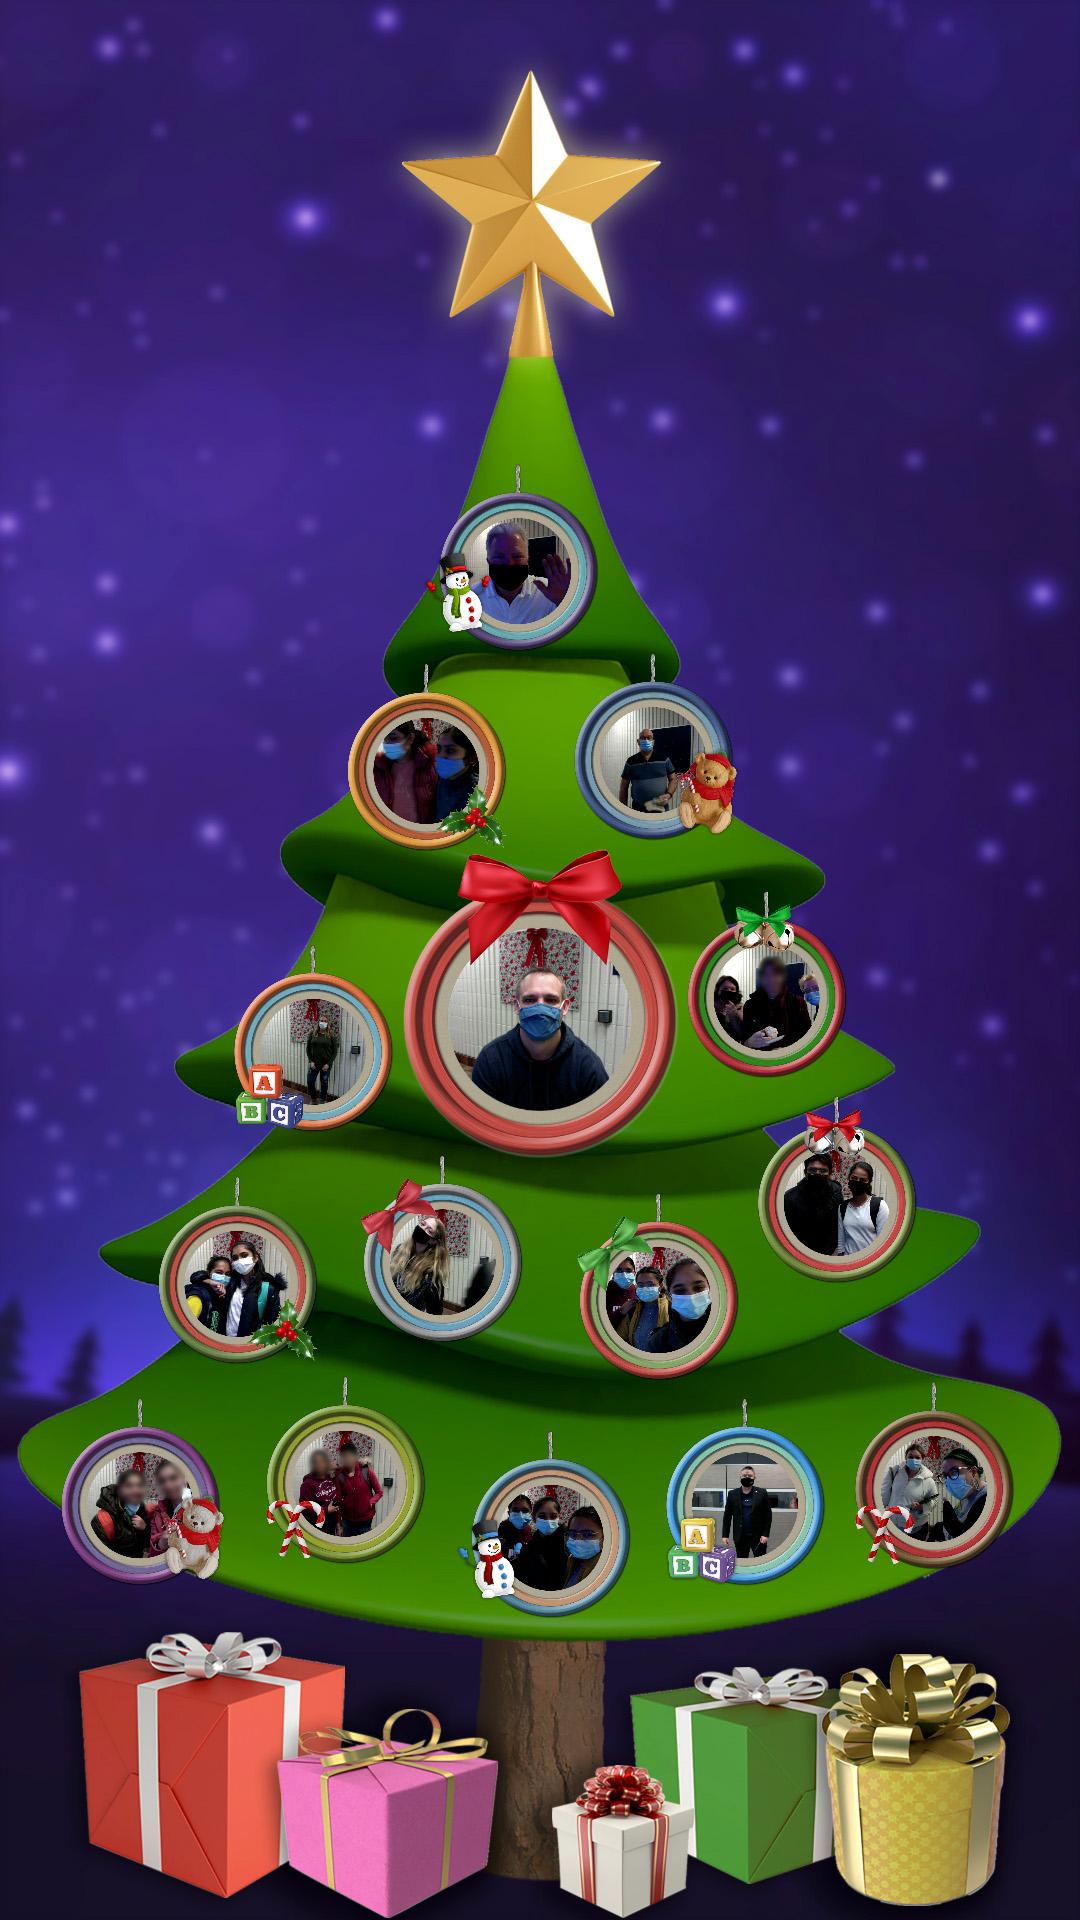 A cartoon-style 3D image of a Christmas tree with wrapped gifts below and a starry sky in the background. On the tree hang circular ornaments, each one framing a photo of 1 to 3 people posing at the photo booth.